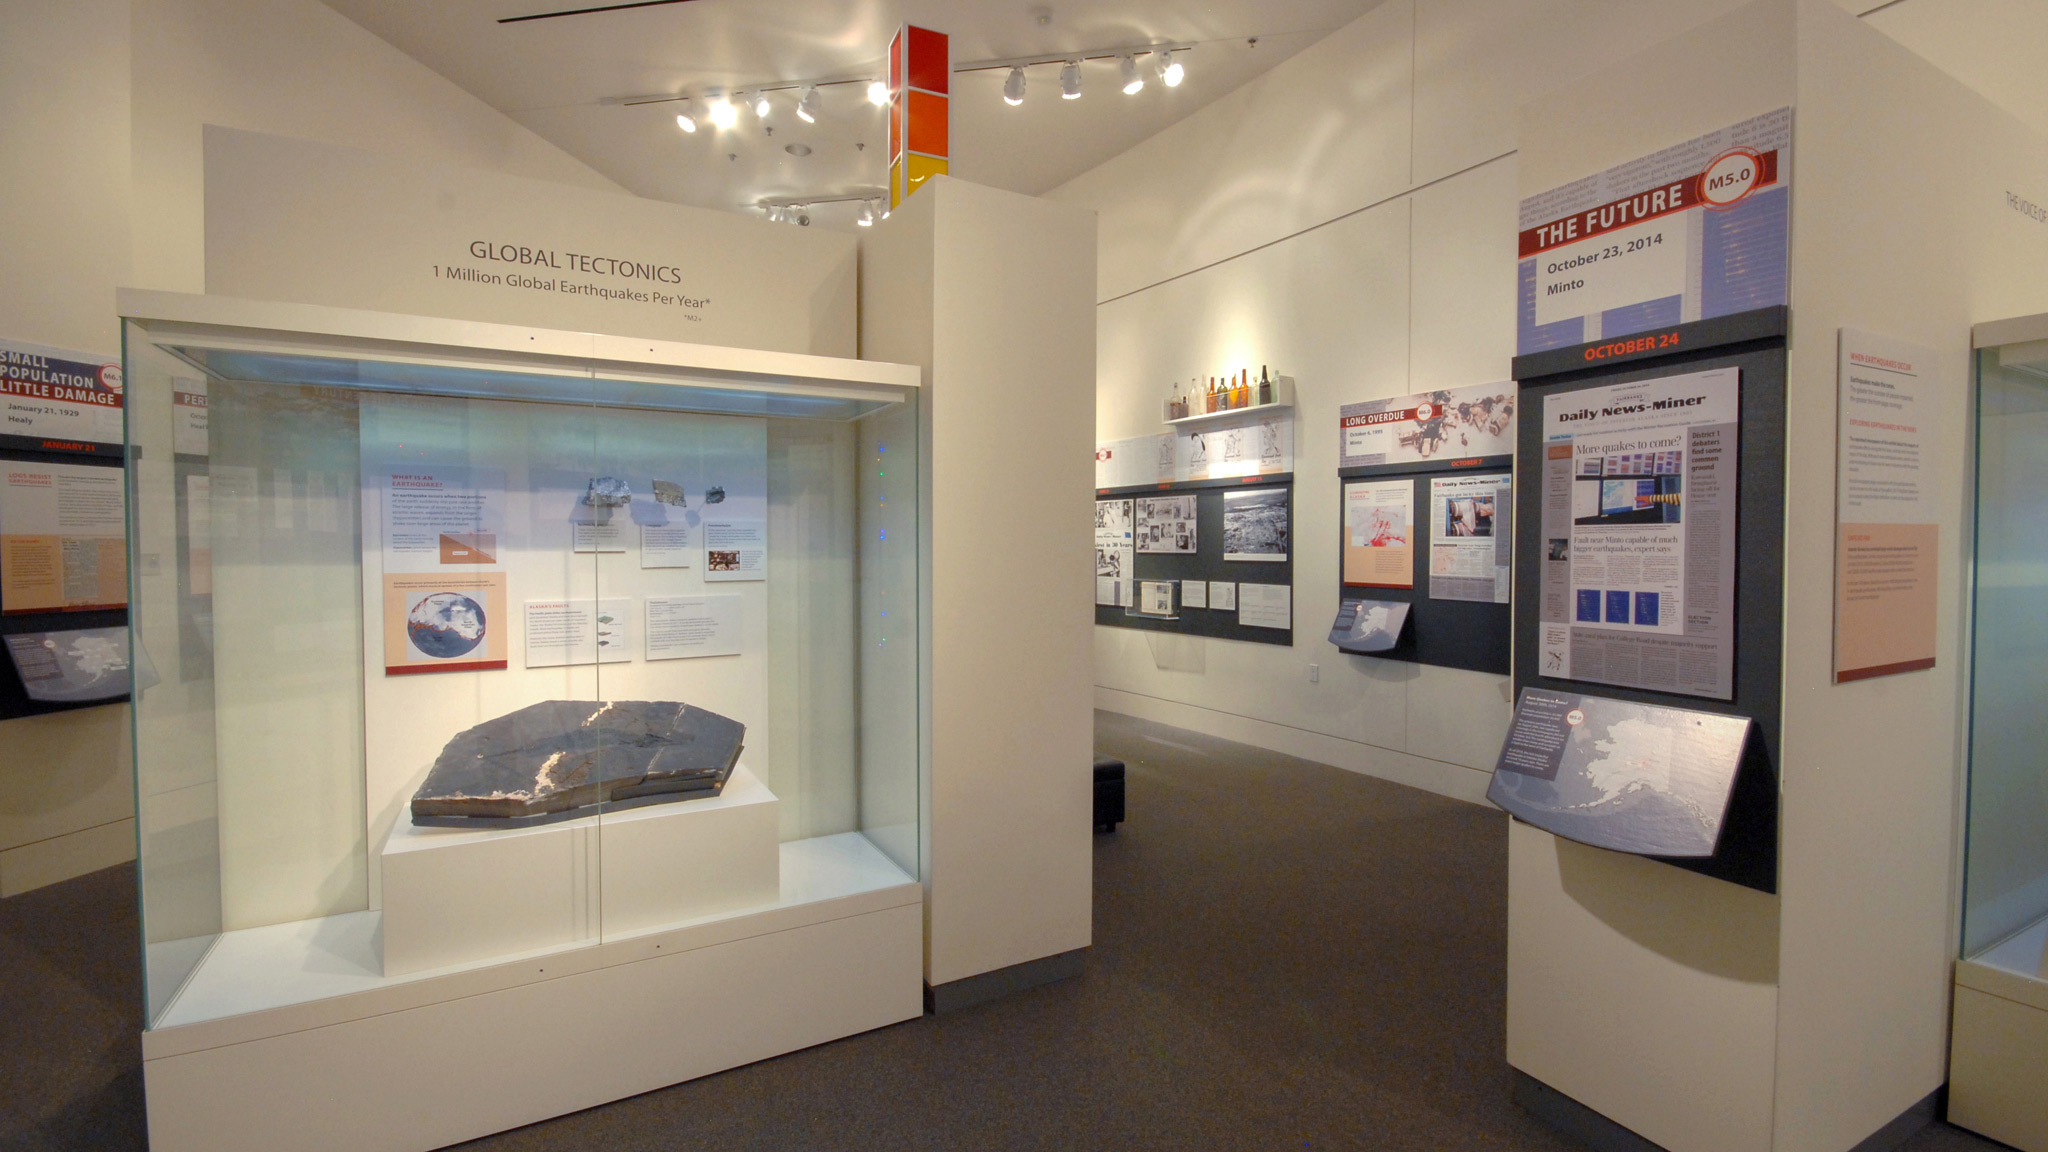 The exhibition’s tectonics case featured rocks formed within tectonic faults and the museum’s thalattosaur specimen, collected in south-central Alaska.